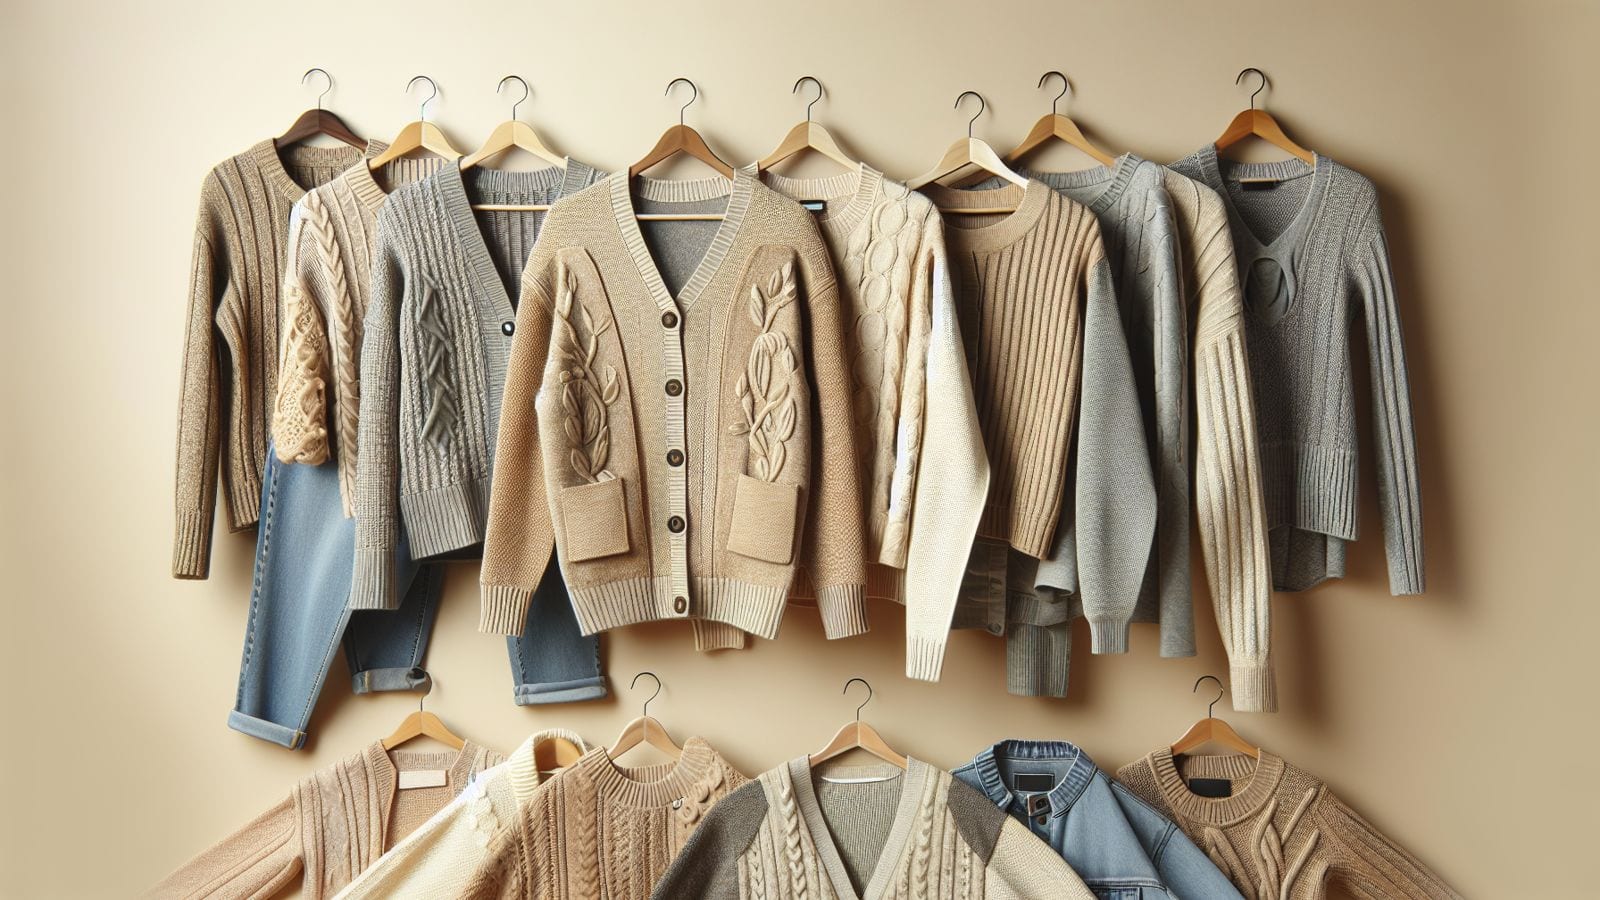 Embrace eco-friendly layering with cardigans